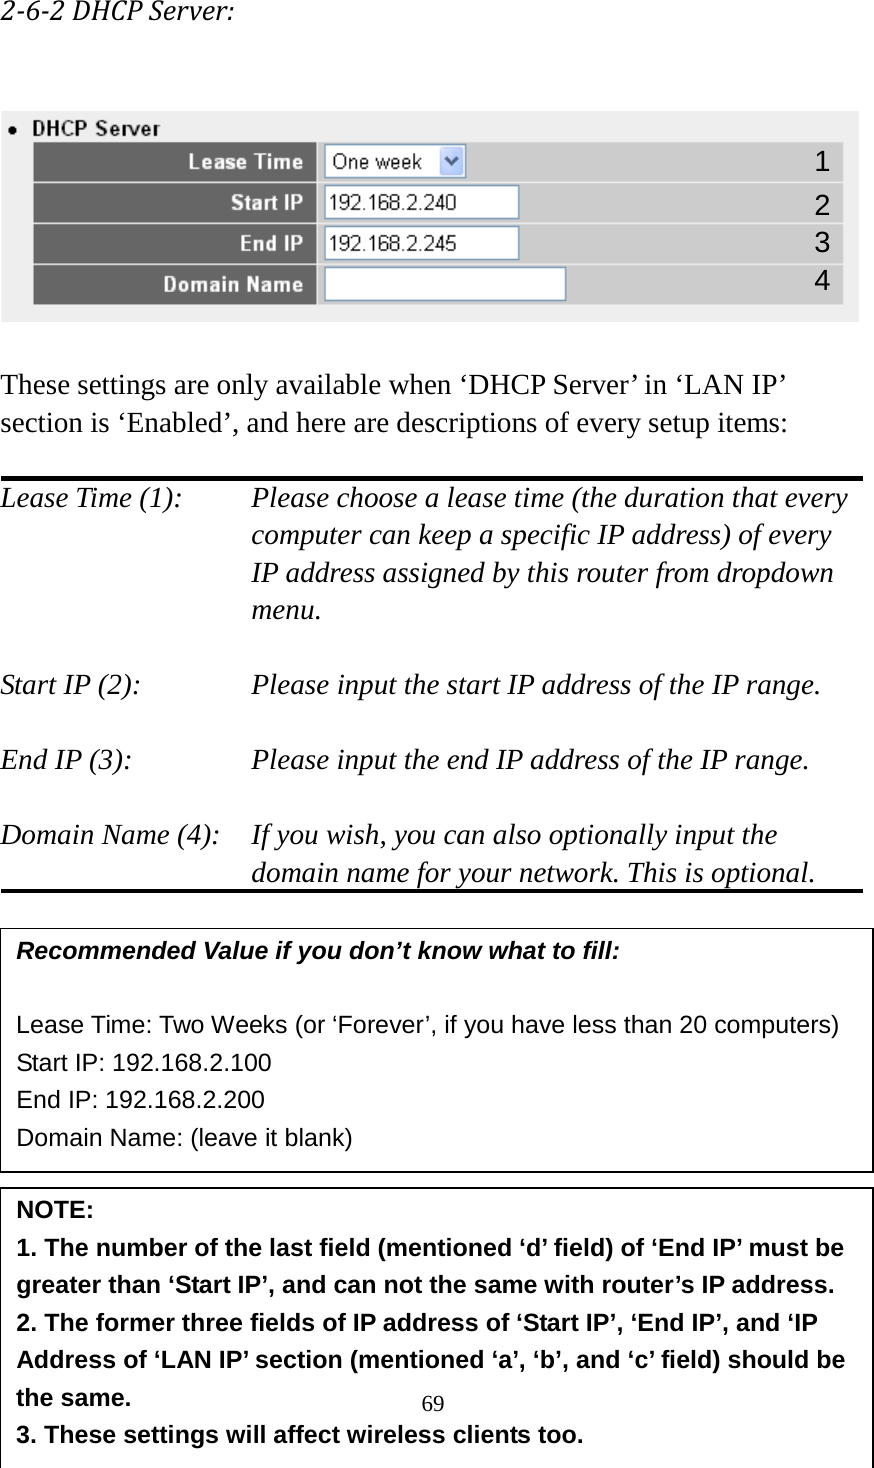 69  2-6-2 DHCP Server:    These settings are only available when ‘DHCP Server’ in ‘LAN IP’ section is ‘Enabled’, and here are descriptions of every setup items:  Lease Time (1):   Please choose a lease time (the duration that every computer can keep a specific IP address) of every IP address assigned by this router from dropdown menu.  Start IP (2):      Please input the start IP address of the IP range.  End IP (3):       Please input the end IP address of the IP range.  Domain Name (4):   If you wish, you can also optionally input the domain name for your network. This is optional.             Recommended Value if you don’t know what to fill:  Lease Time: Two Weeks (or ‘Forever’, if you have less than 20 computers) Start IP: 192.168.2.100 End IP: 192.168.2.200 Domain Name: (leave it blank) NOTE:   1. The number of the last field (mentioned ‘d’ field) of ‘End IP’ must be greater than ‘Start IP’, and can not the same with router’s IP address. 2. The former three fields of IP address of ‘Start IP’, ‘End IP’, and ‘IP Address of ‘LAN IP’ section (mentioned ‘a’, ‘b’, and ‘c’ field) should be the same. 3. These settings will affect wireless clients too. 1 3 4 2 